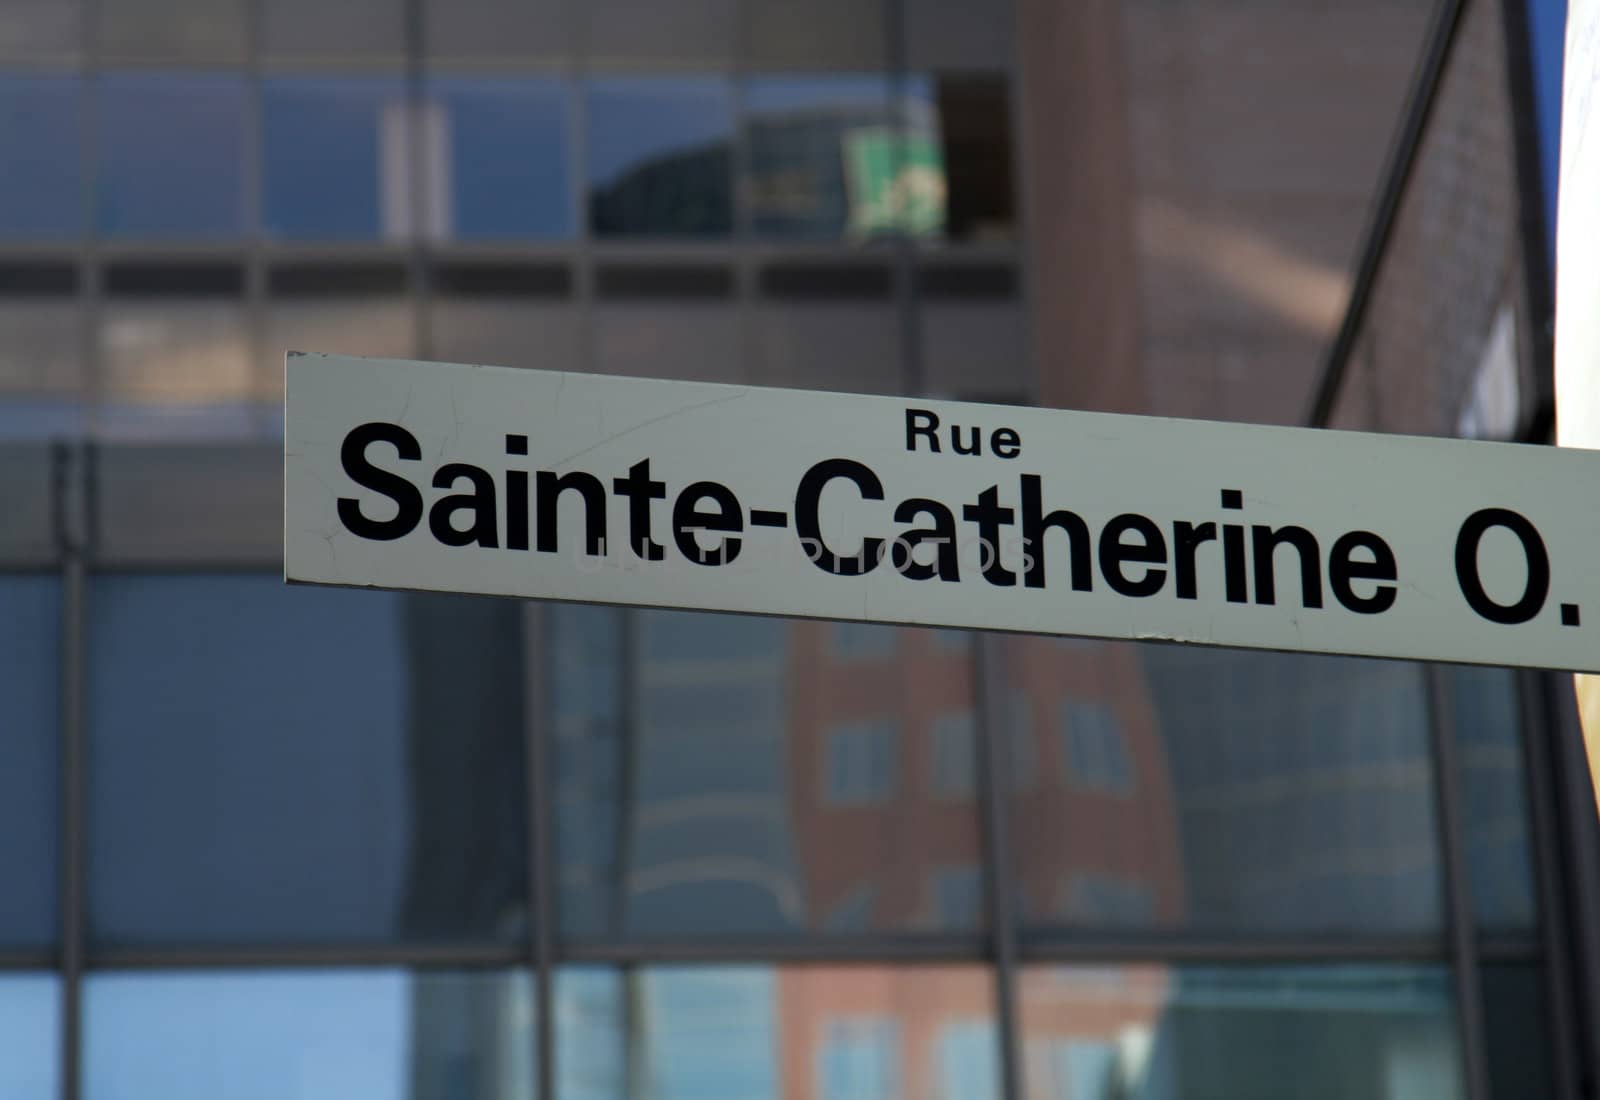 A street sign for Sainte-Catherine street in Montreal, Quebec, Canada.